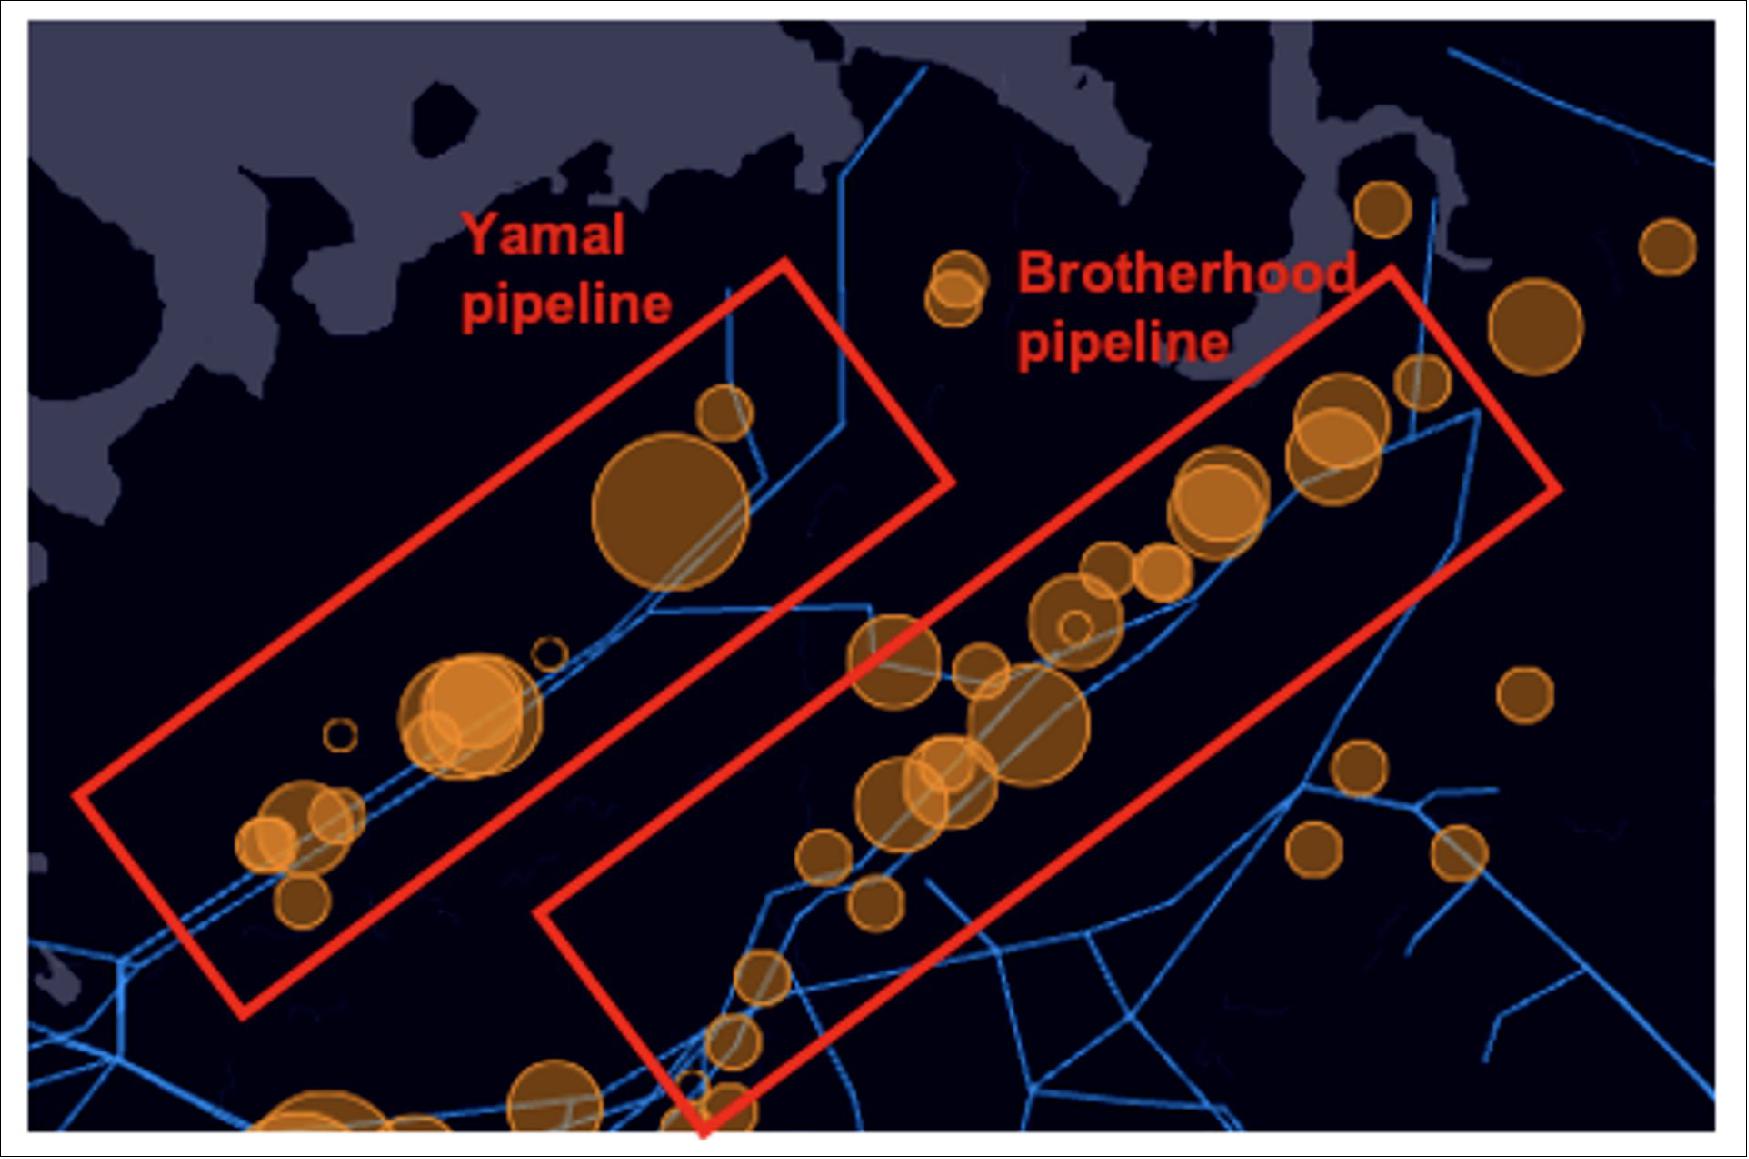 Figure 38: Emission hotspots detected around natural gas pipelines including the Yamal-Europe and ‘Brotherhood' pipelines (image credit: ESA, the image contains modified Copernicus data (2020), processed by Kayrros)